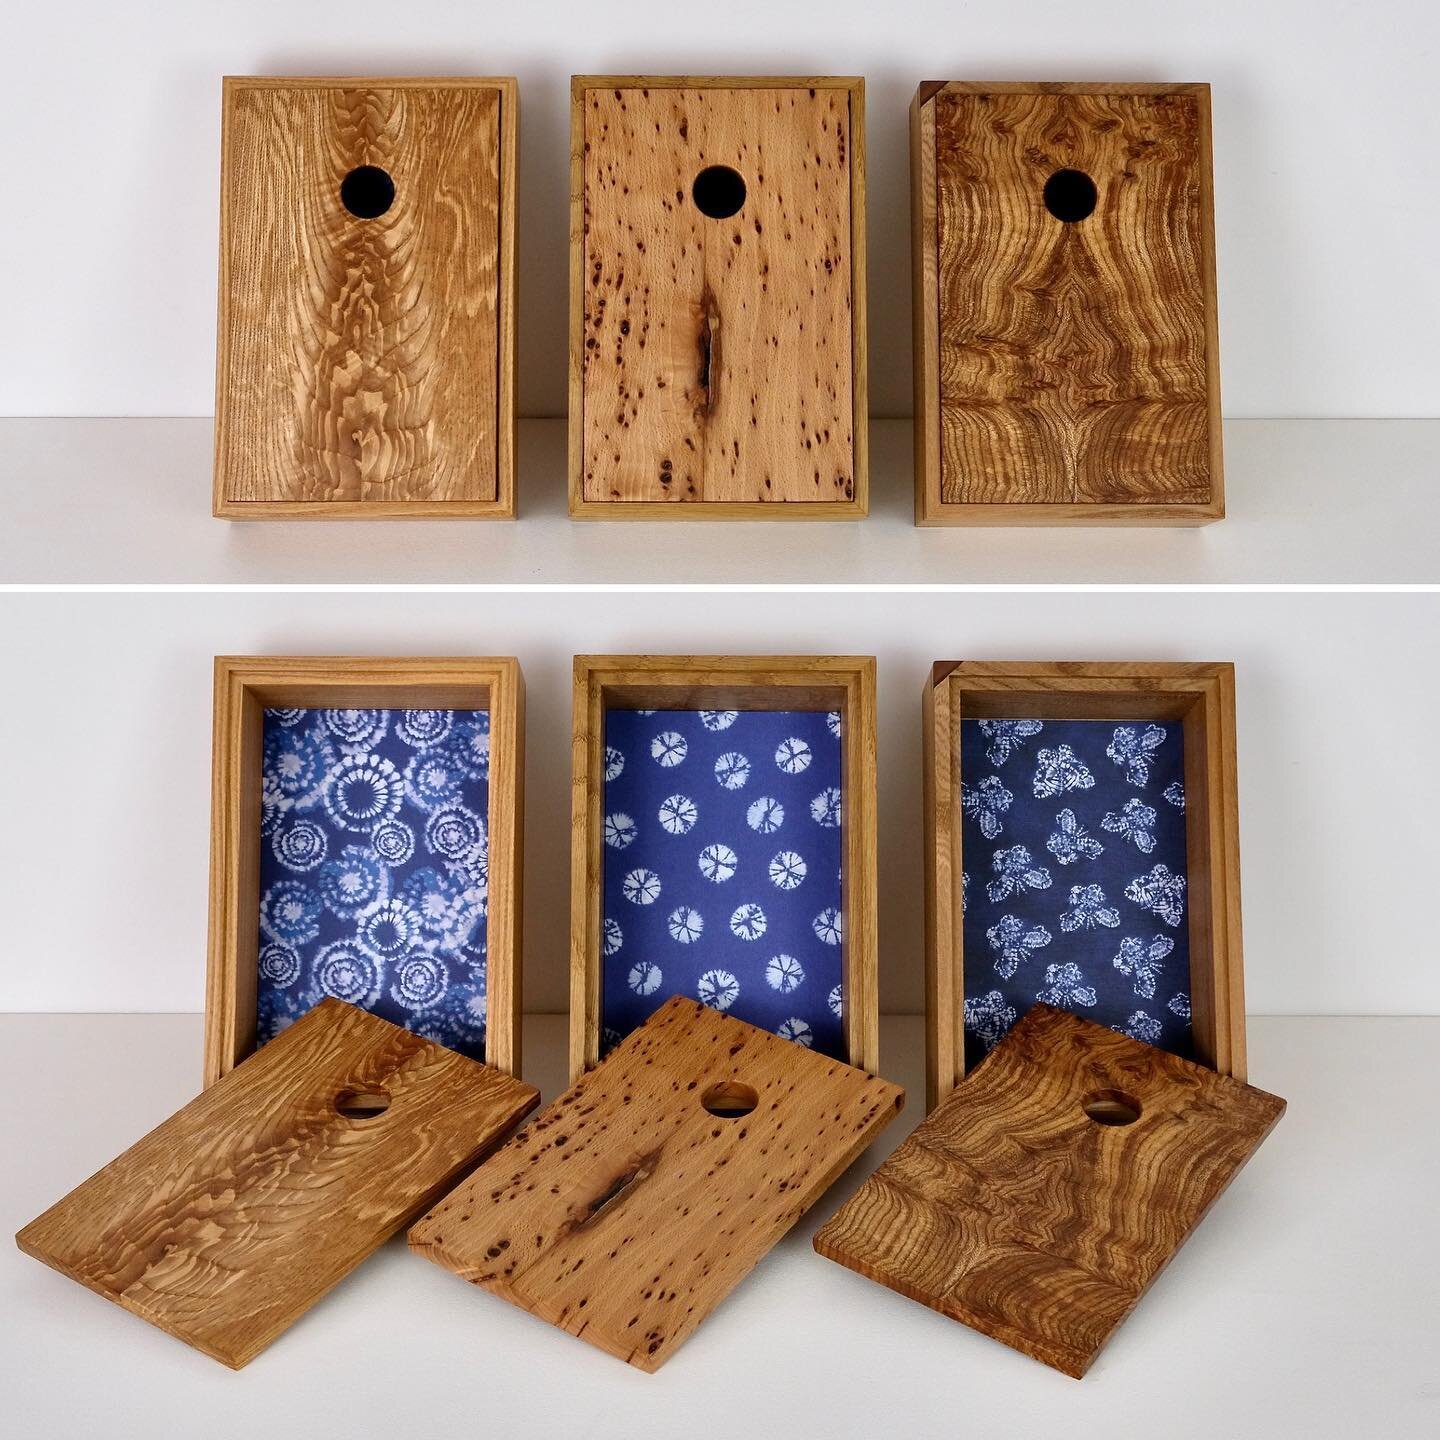 Taps-Aff for summer! Small batch of Keepsake boxes finished this week. Ash / Olive Ash, Oak / Pippy Beech &amp; Elm / Burr Elm (L to R). Blue decoupage paper really makes the tones pop. 
#sfmamembers #scottishfurnituremakersassociation #woodwork #woo